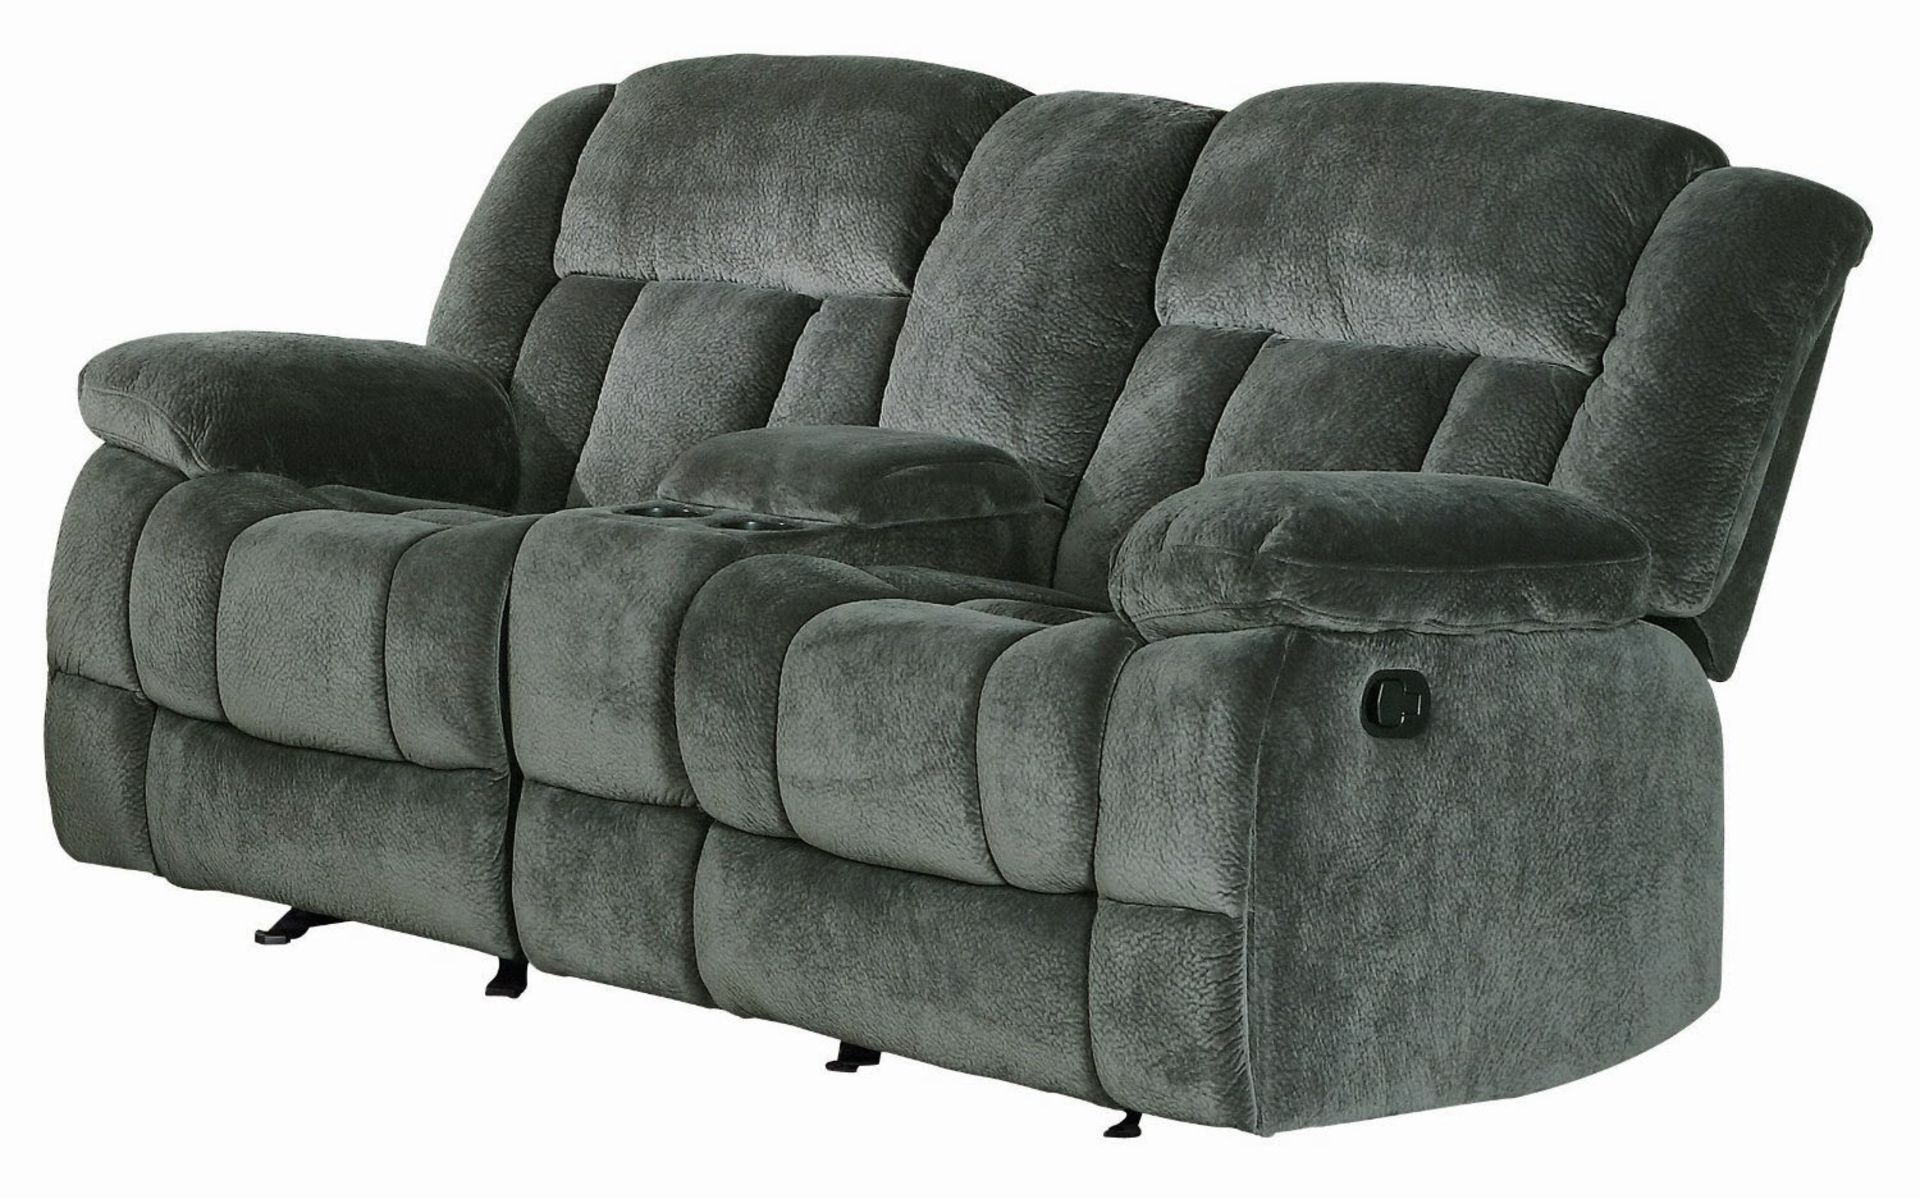 Supreme Valance charcoal grey fabric 3 seater reclining sofa - Image 2 of 2